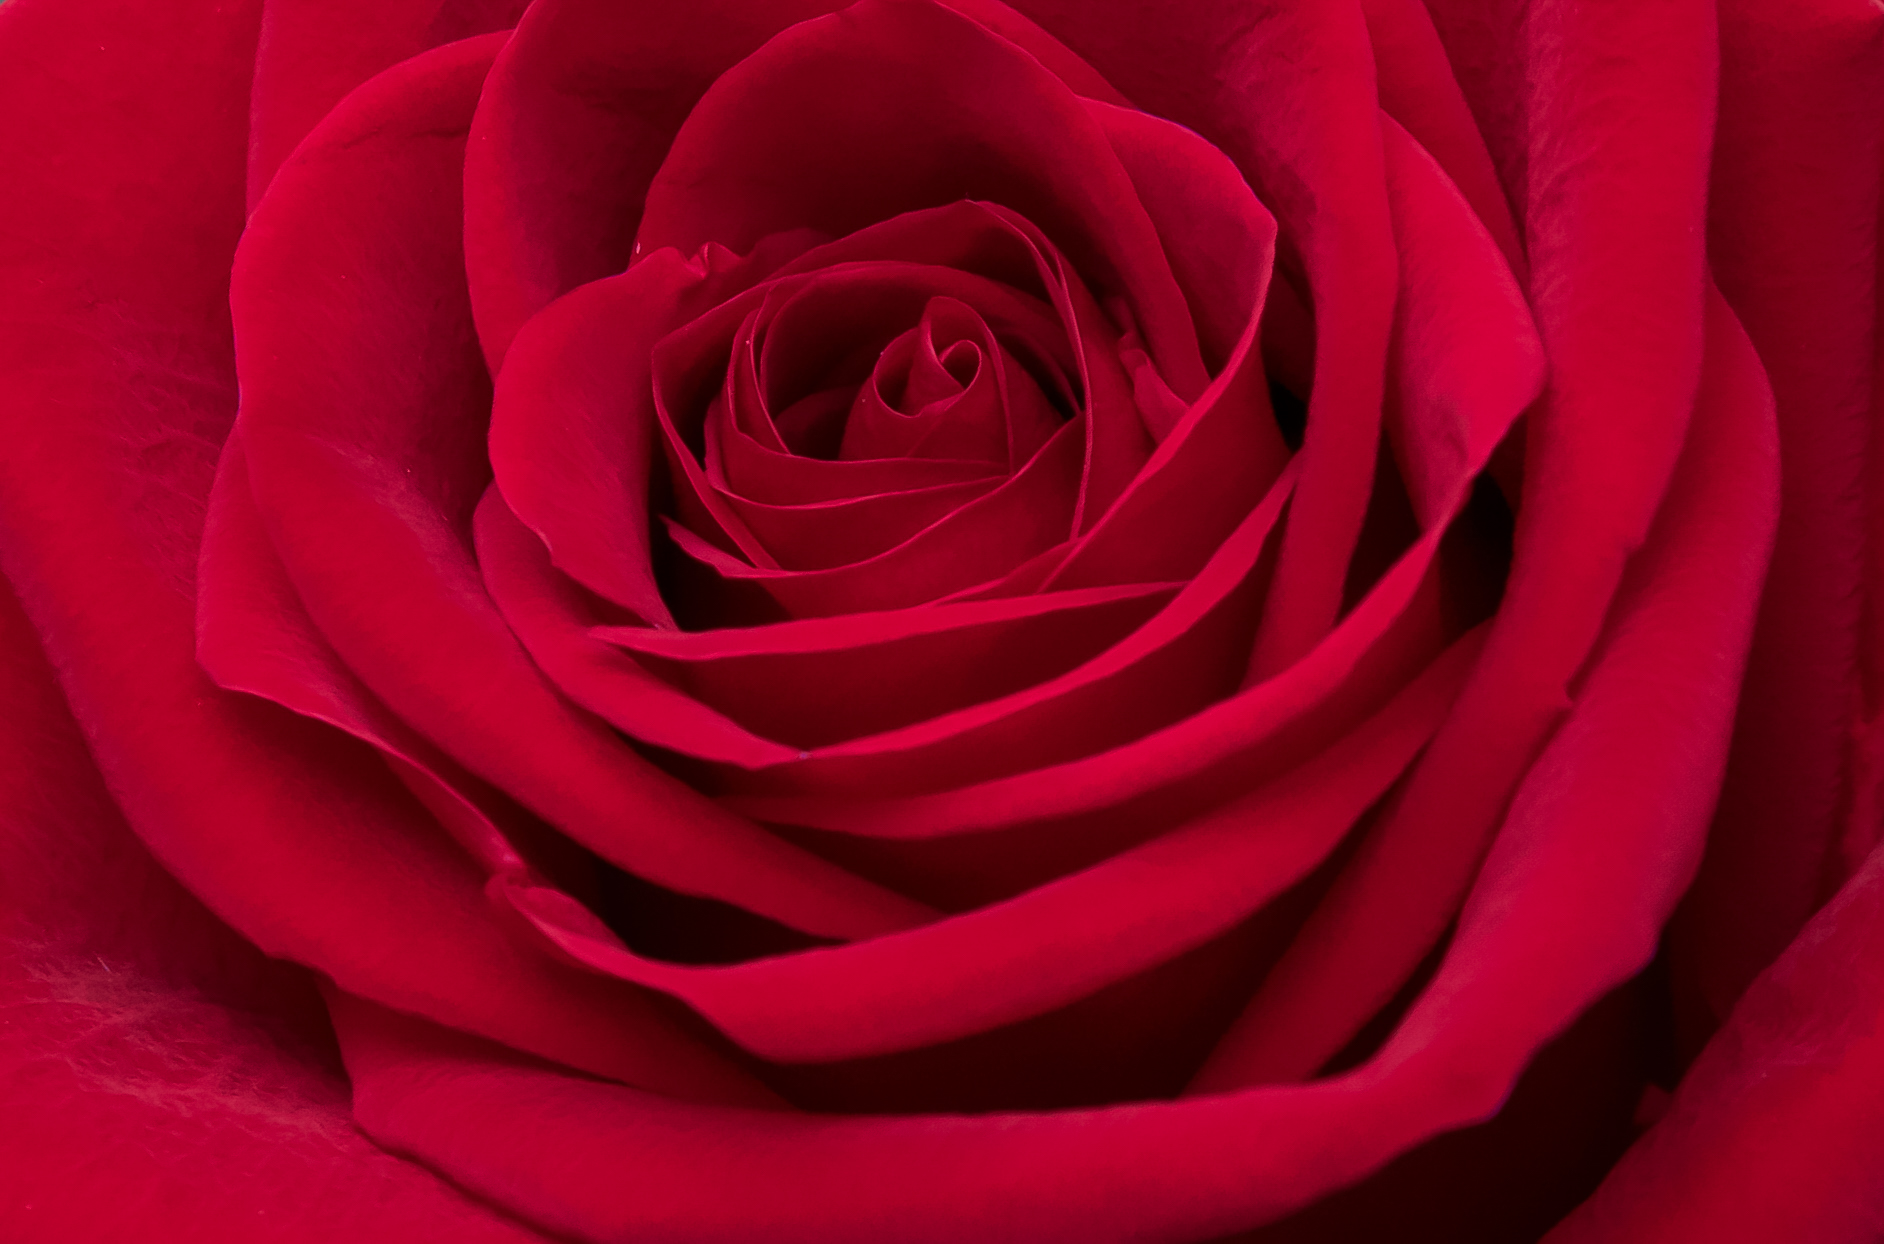 Red Roses Close Up Background Free Stock Photo